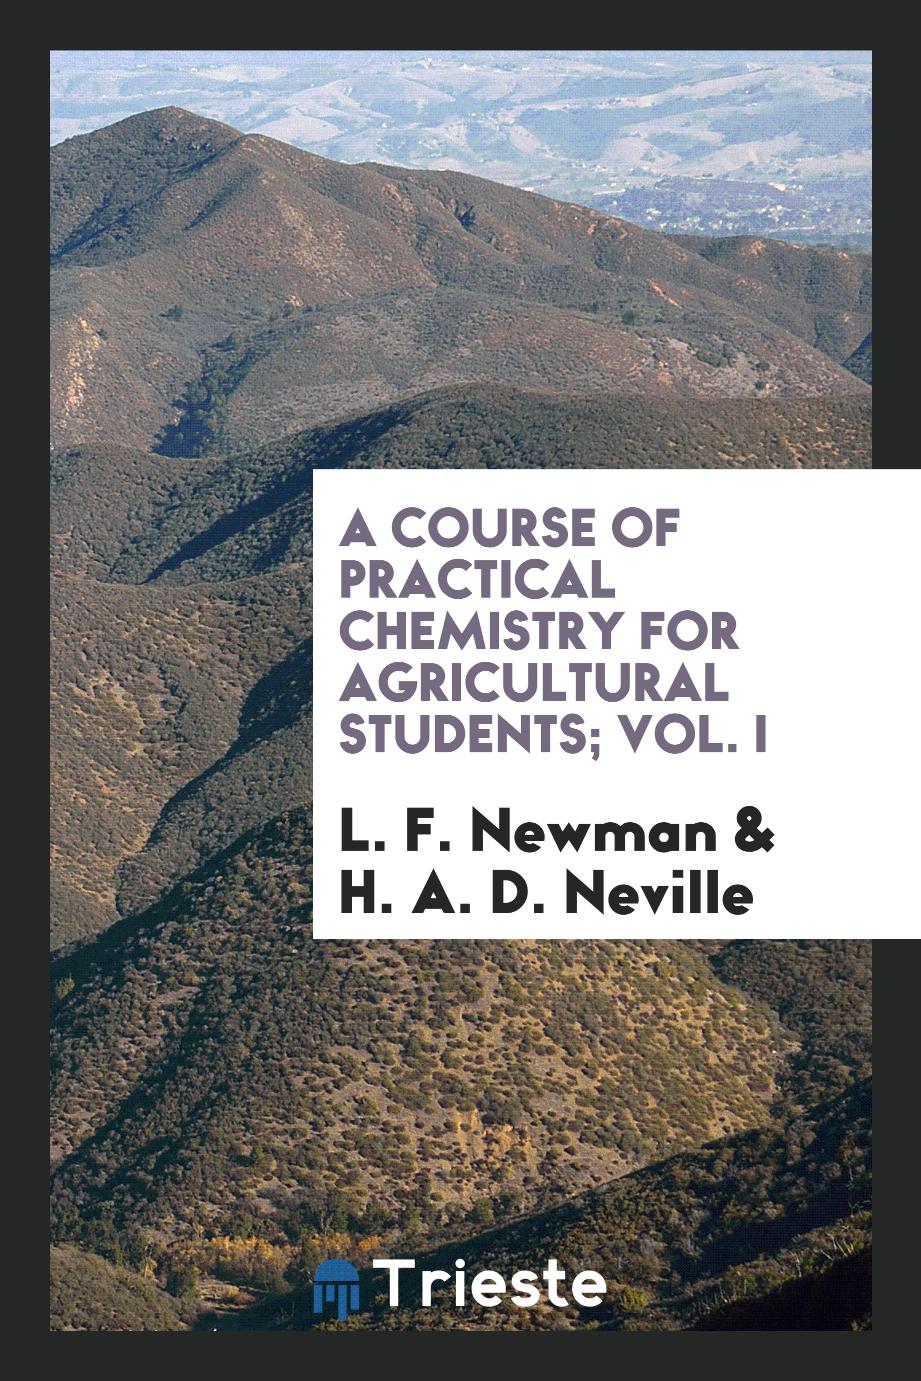 A course of practical chemistry for agricultural students; Vol. I